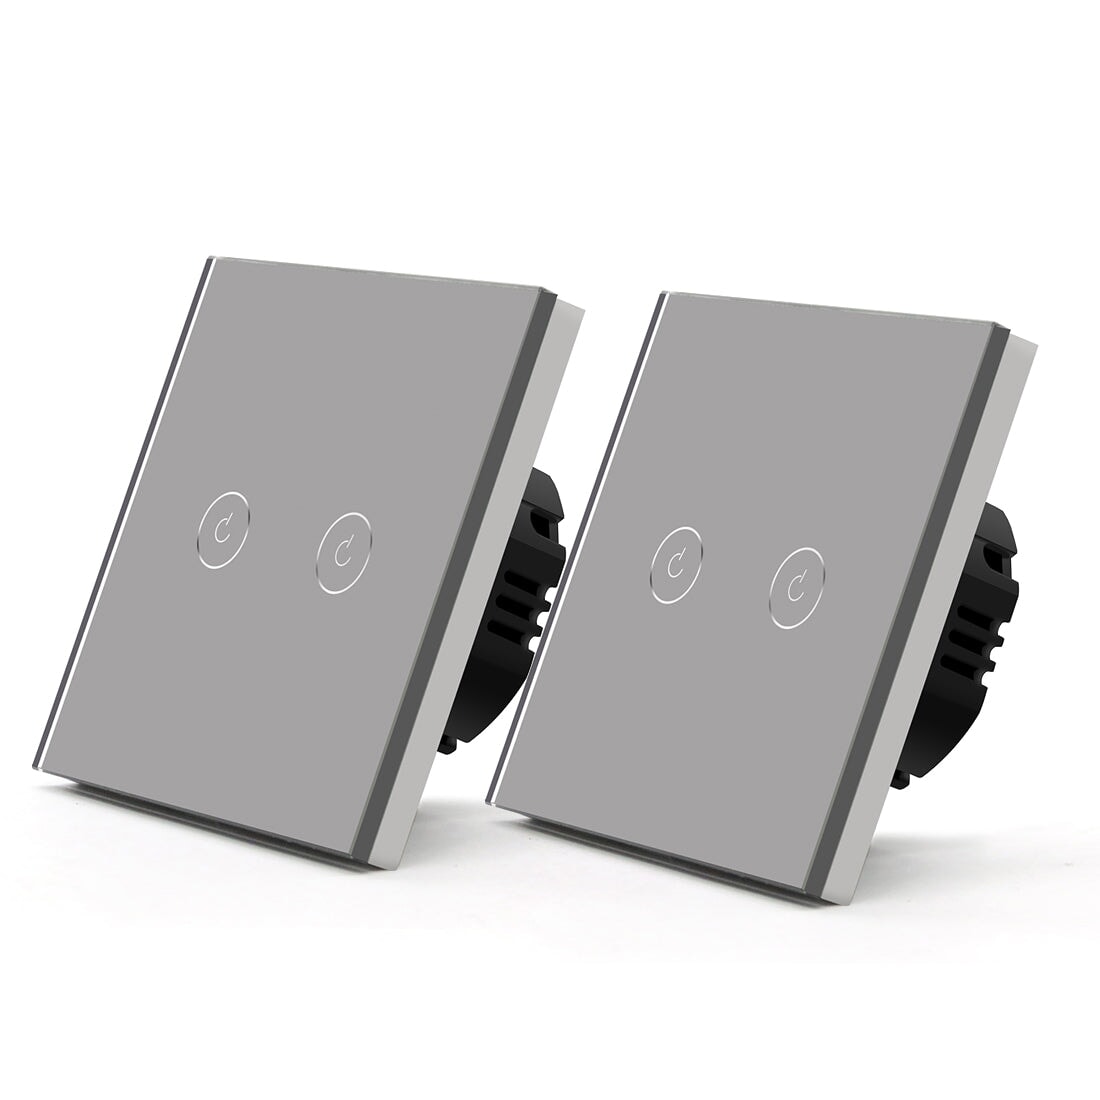 Bseed Smart Wifi Touch Switch 2 Gang 1/2/3 Way 1/2/3 Pcs/Pack Wall Plates & Covers Bseedswitch Grey 2Pcs/Pack 